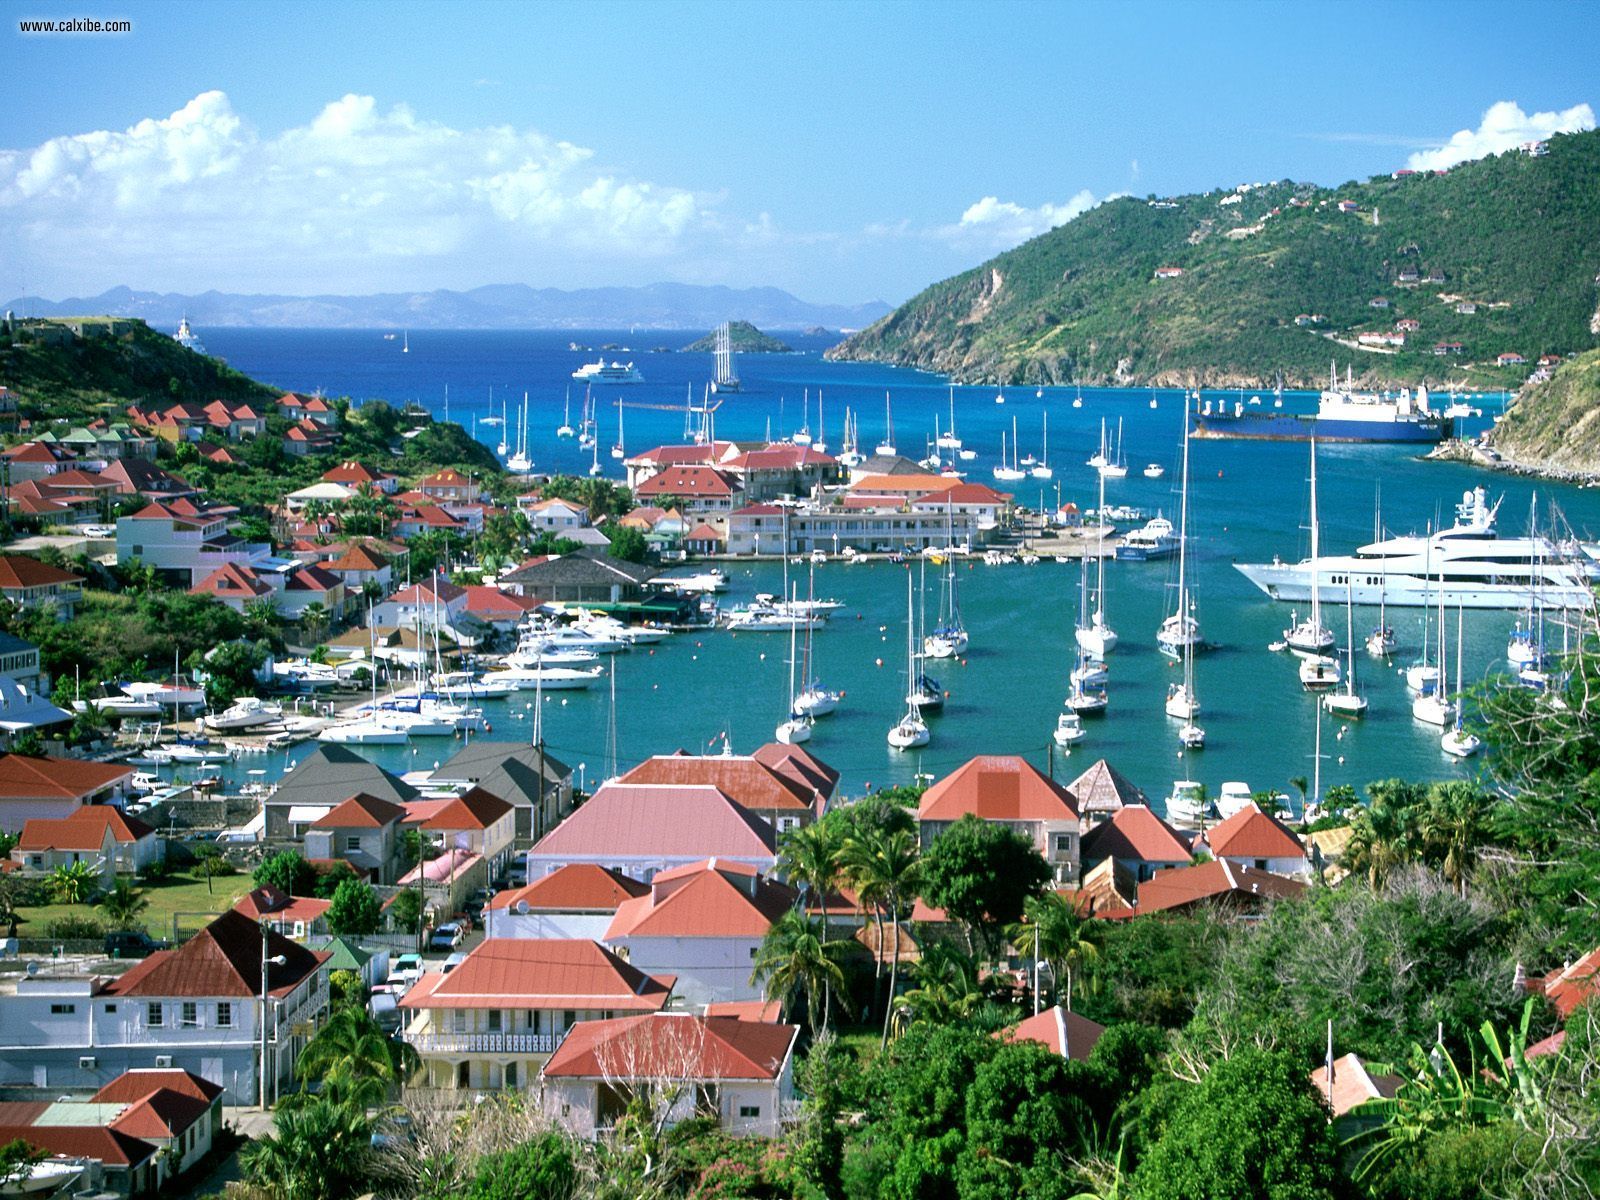 Main Town Of The Island St Barthelemy Also Known As Saint Barts It